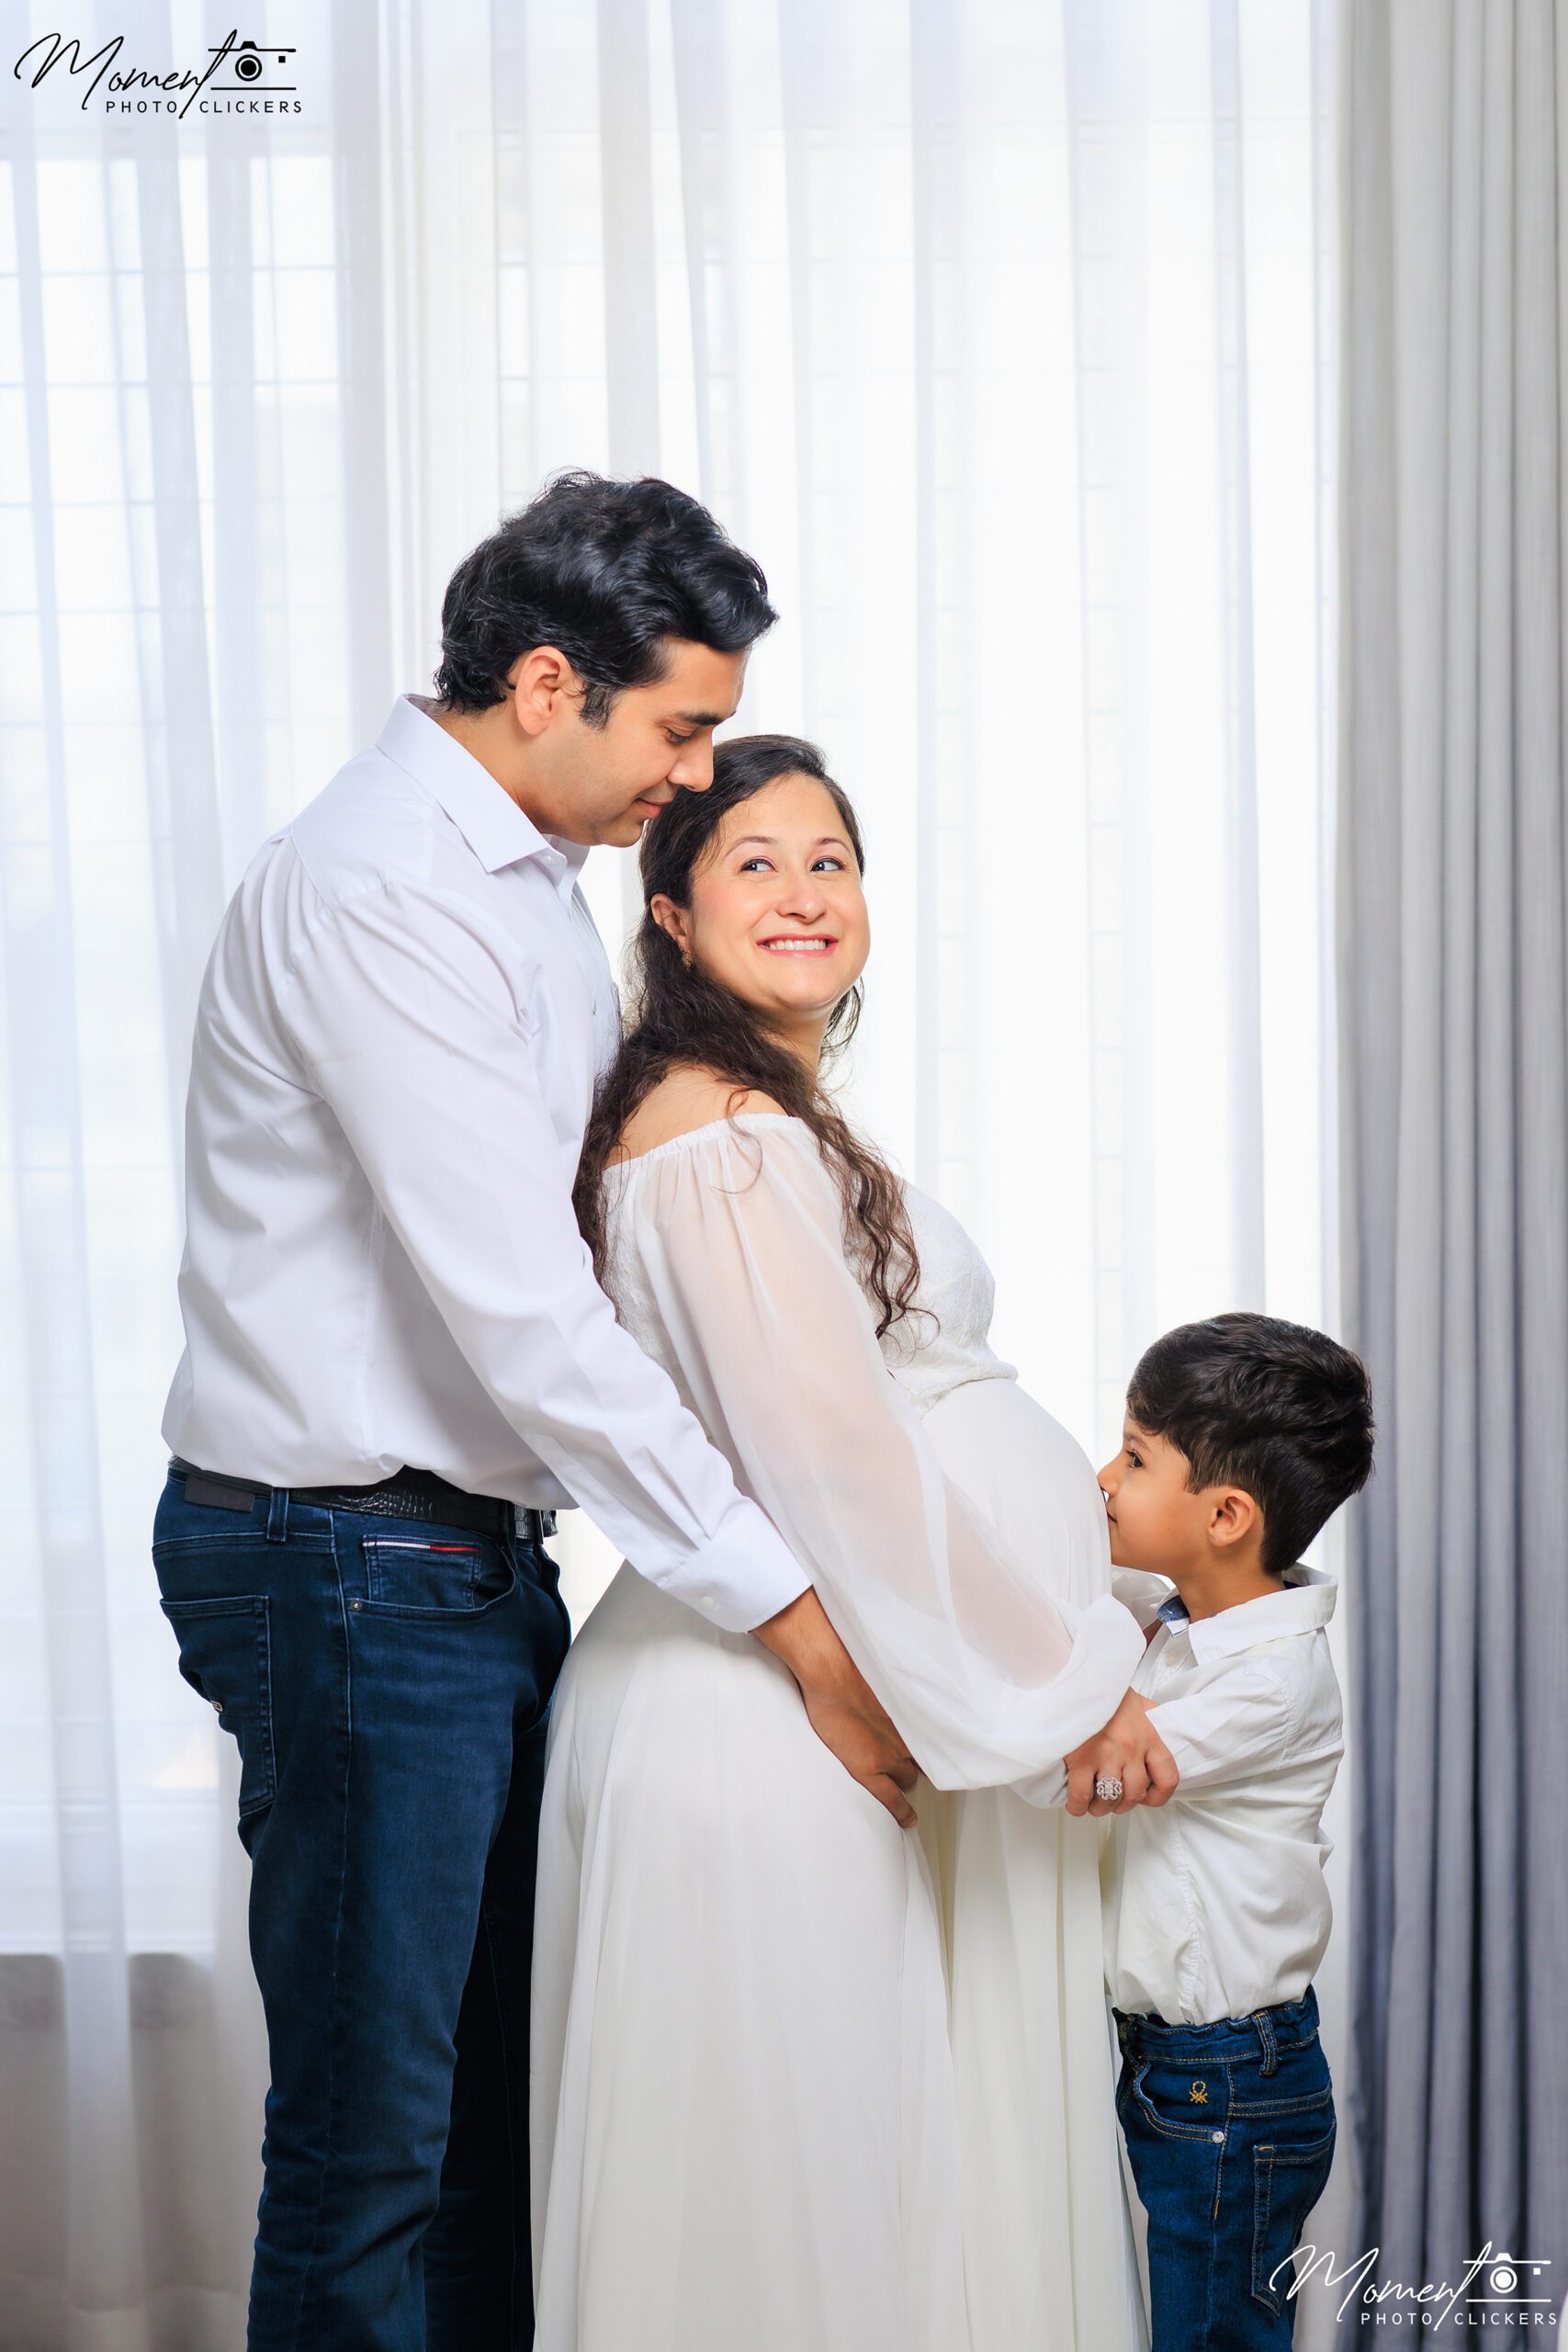 Maternity Photoshoot in India  Have a look on Maternity Shoots